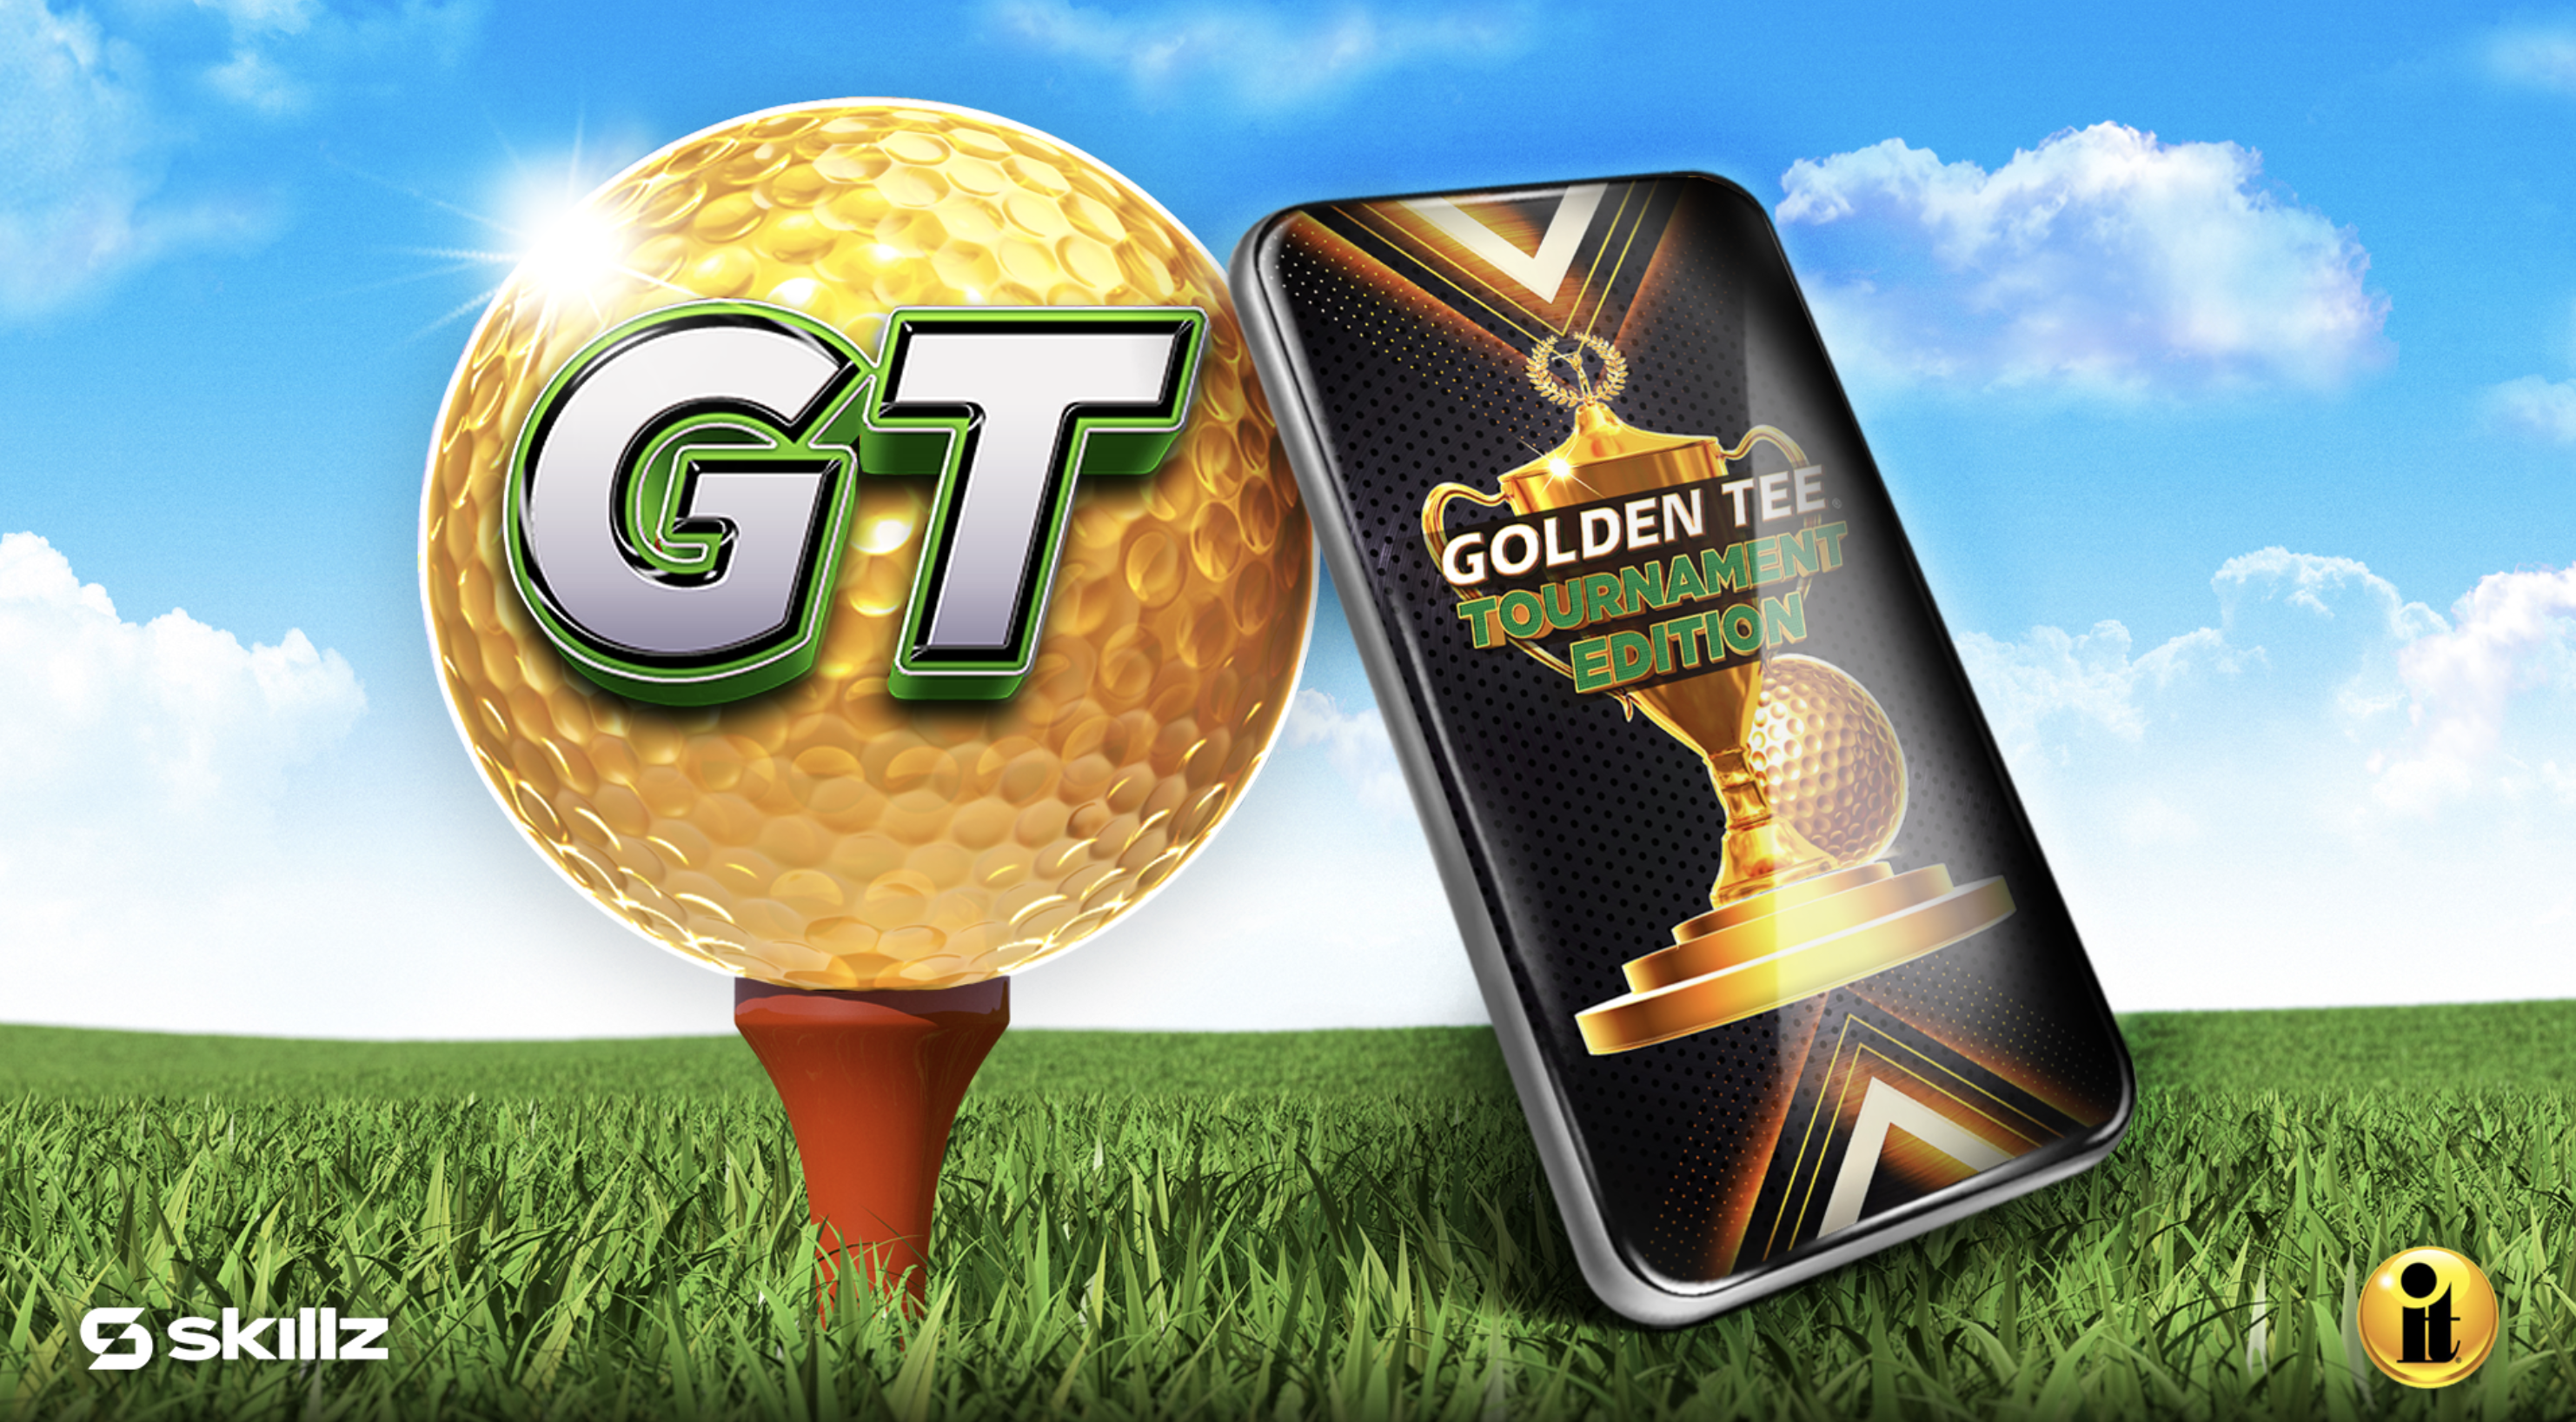 HOLE-IN-ONE! INCREDIBLE TECHNOLOGIES PARTNERS WITH SKILLZ TO OFFER MOBILE CASH PRIZES WITH GOLDEN TEE: TOURNAMENT EDITION